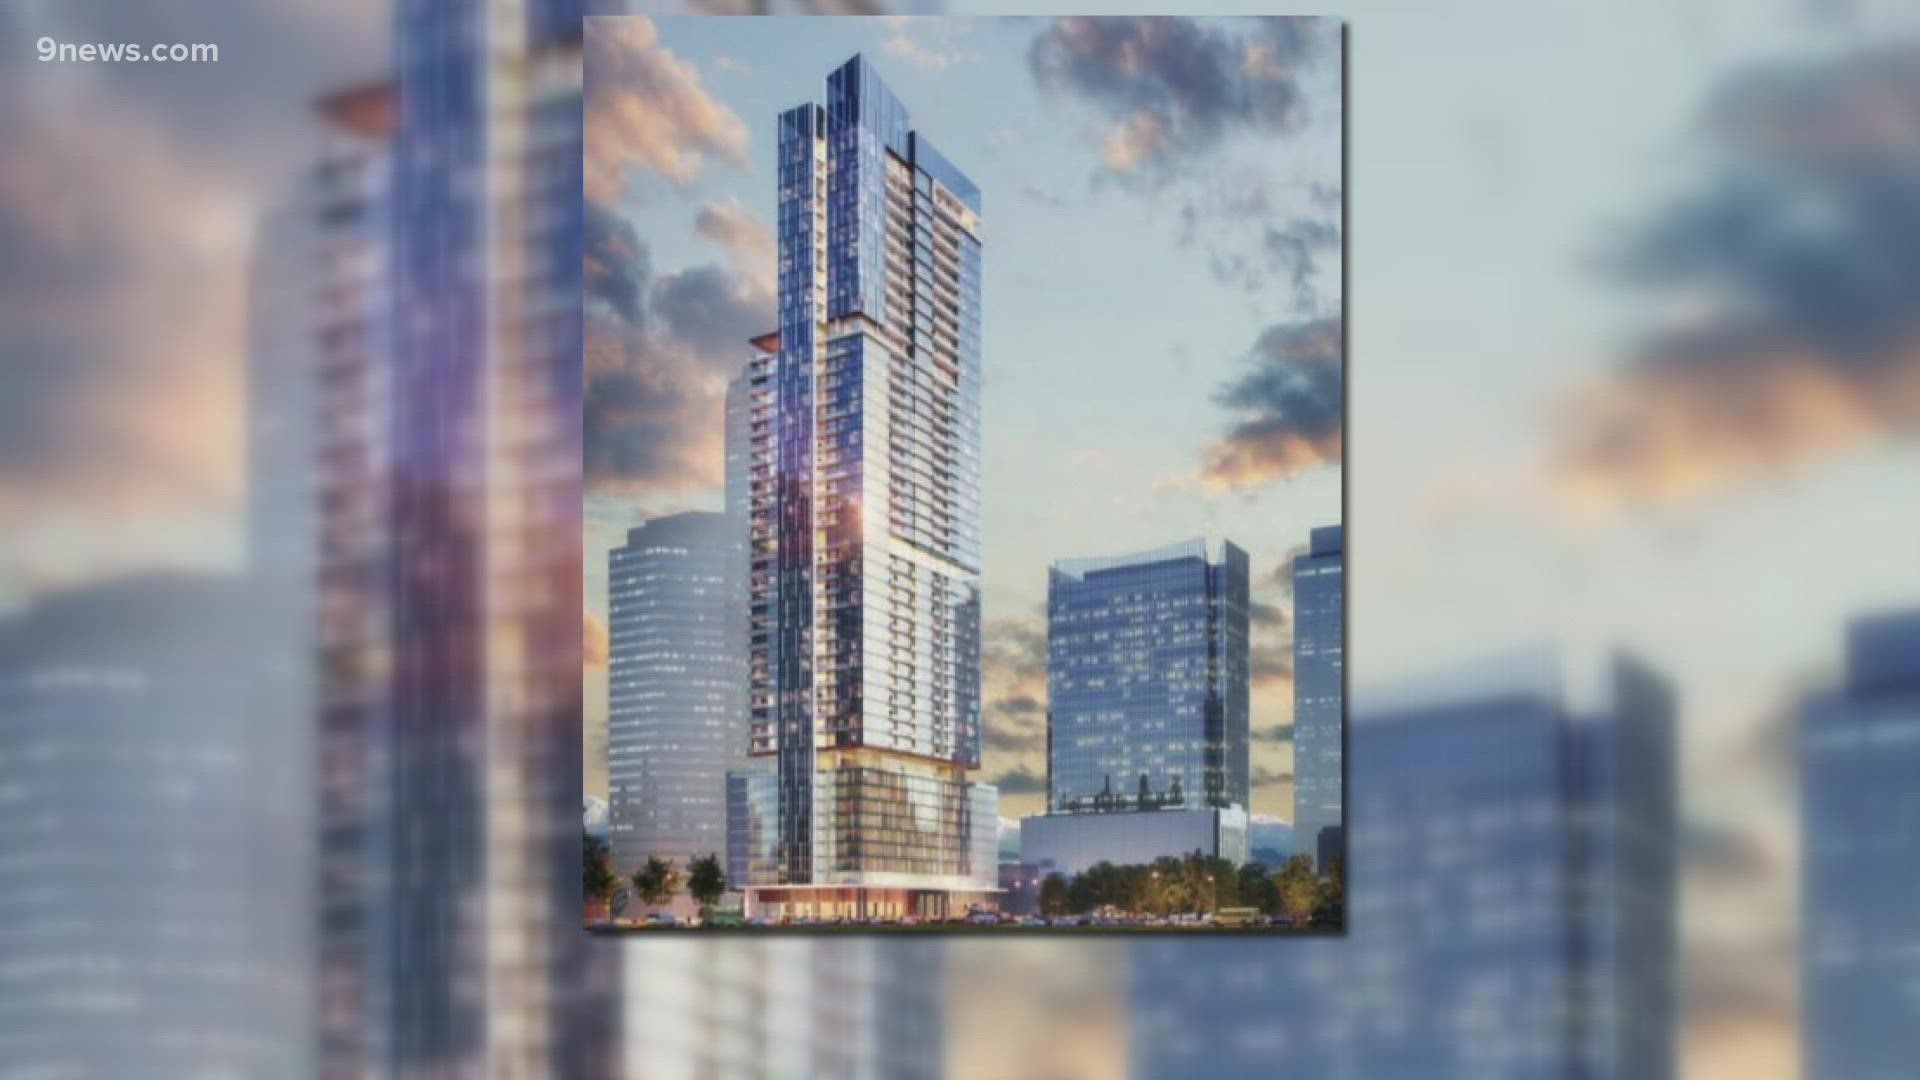 This is not the first time a massive skyscraper has been proposed for the site.